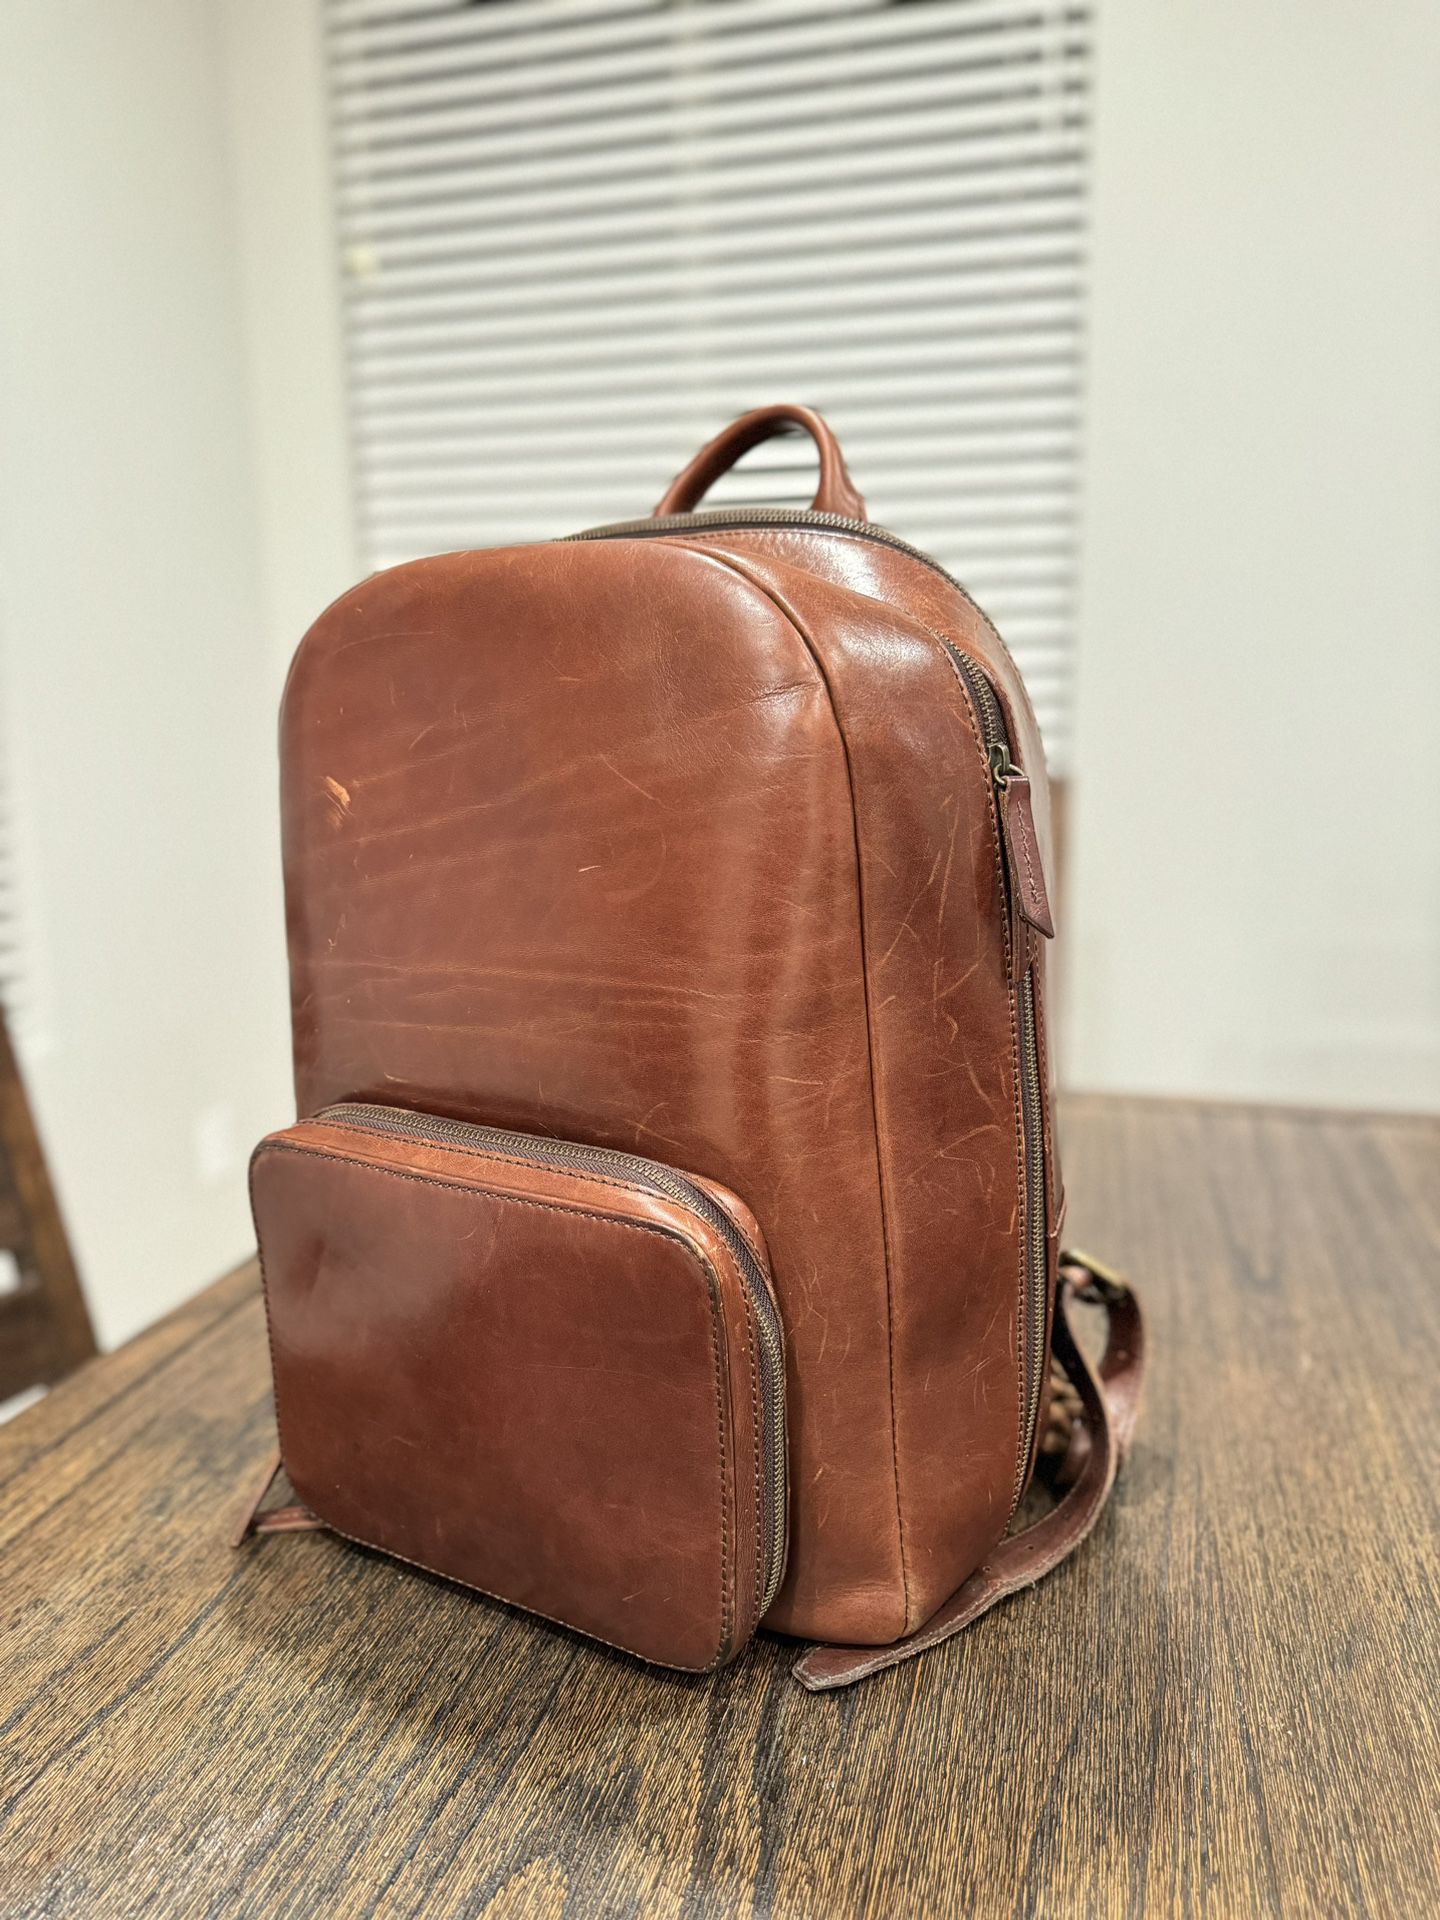 Satchel & Page Leather Backpack